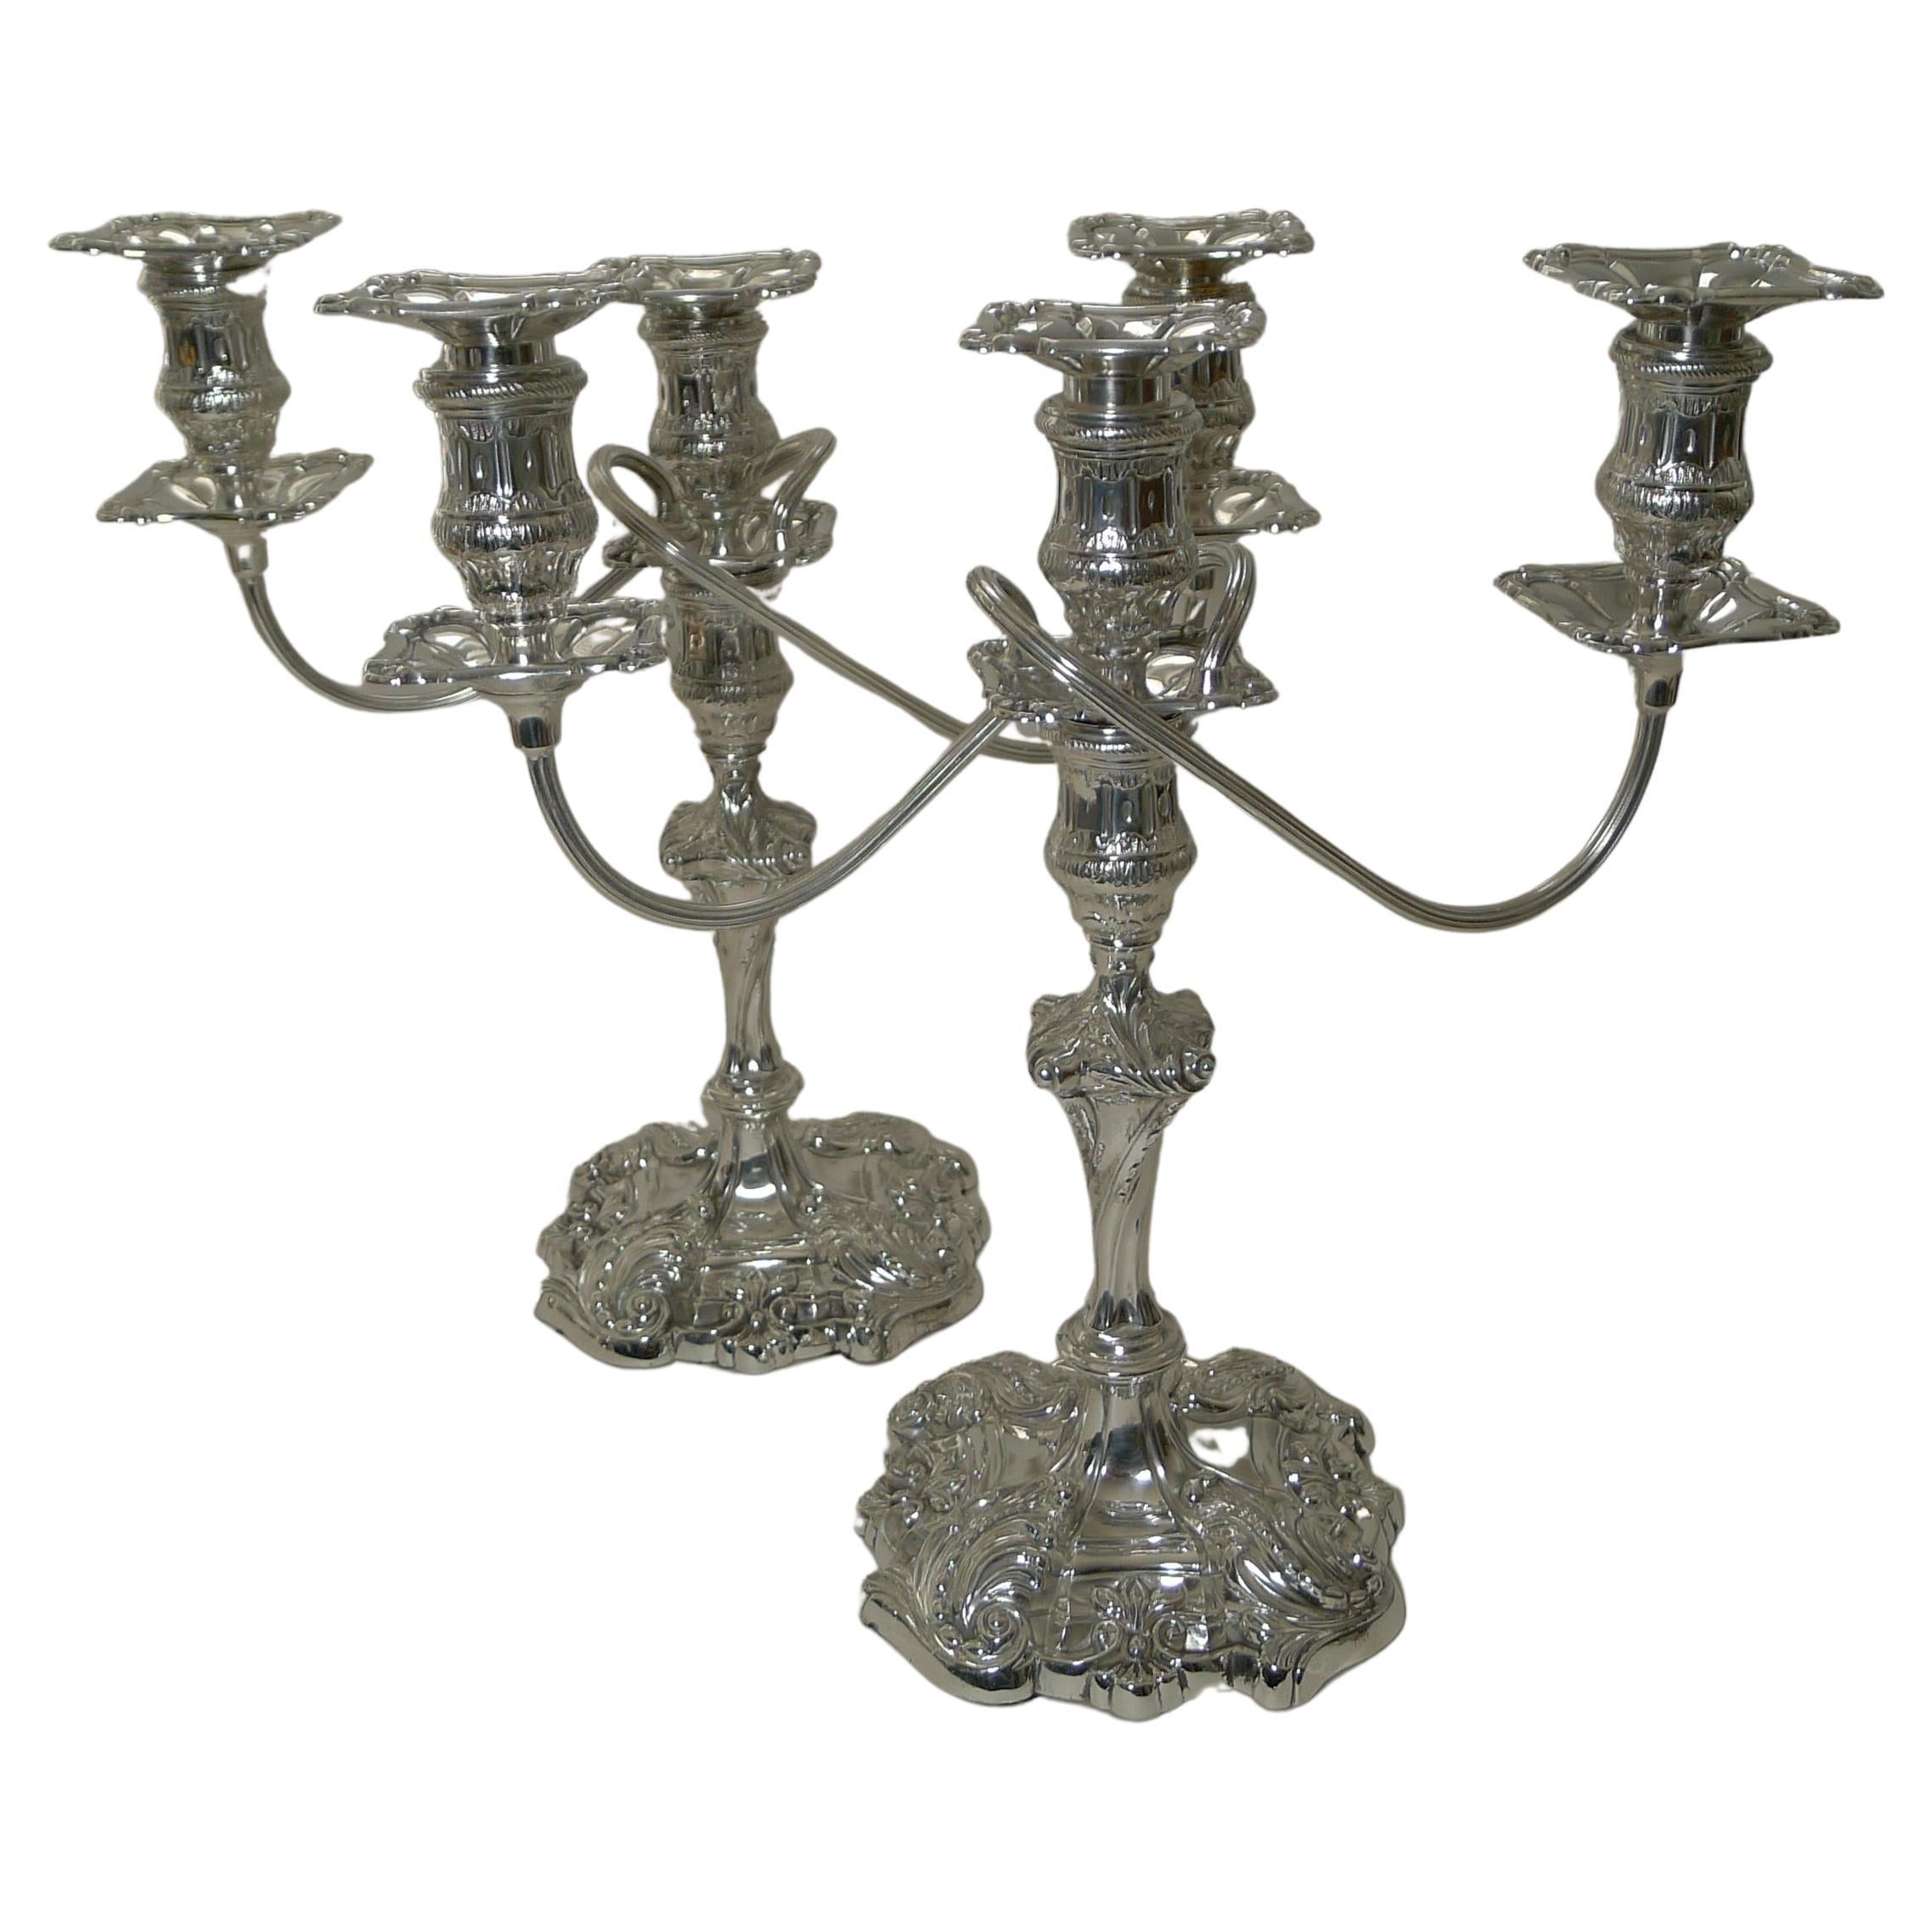 Pair Antique English Silver Plated Candelabra by Jenkins & Timm, c.1900